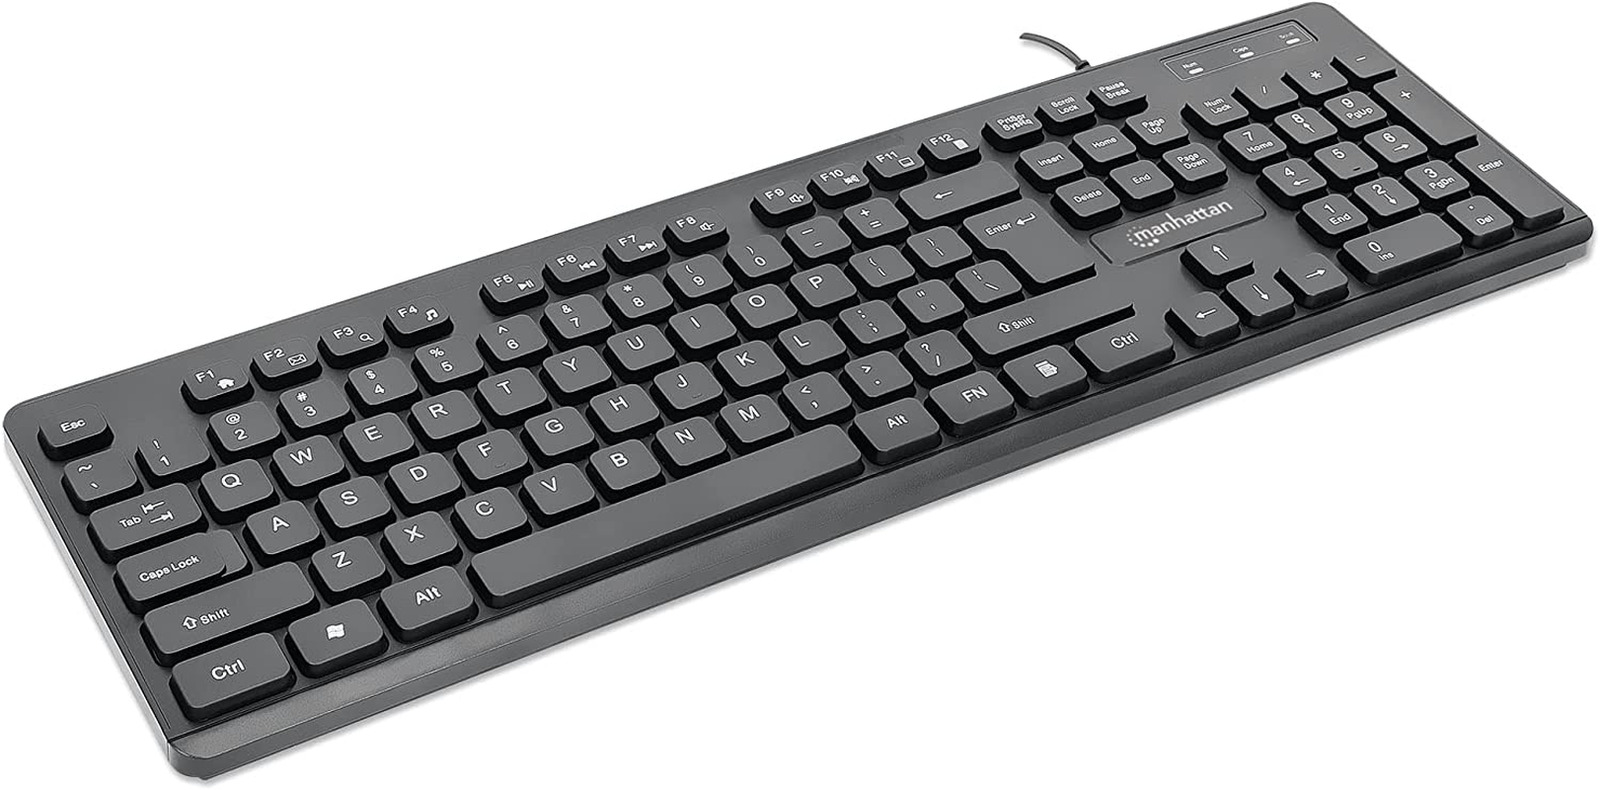 USB Wired Computer Keyboard - with 4.5 Ft USB-A Cable, 104 Quiet Membrane Keys, 